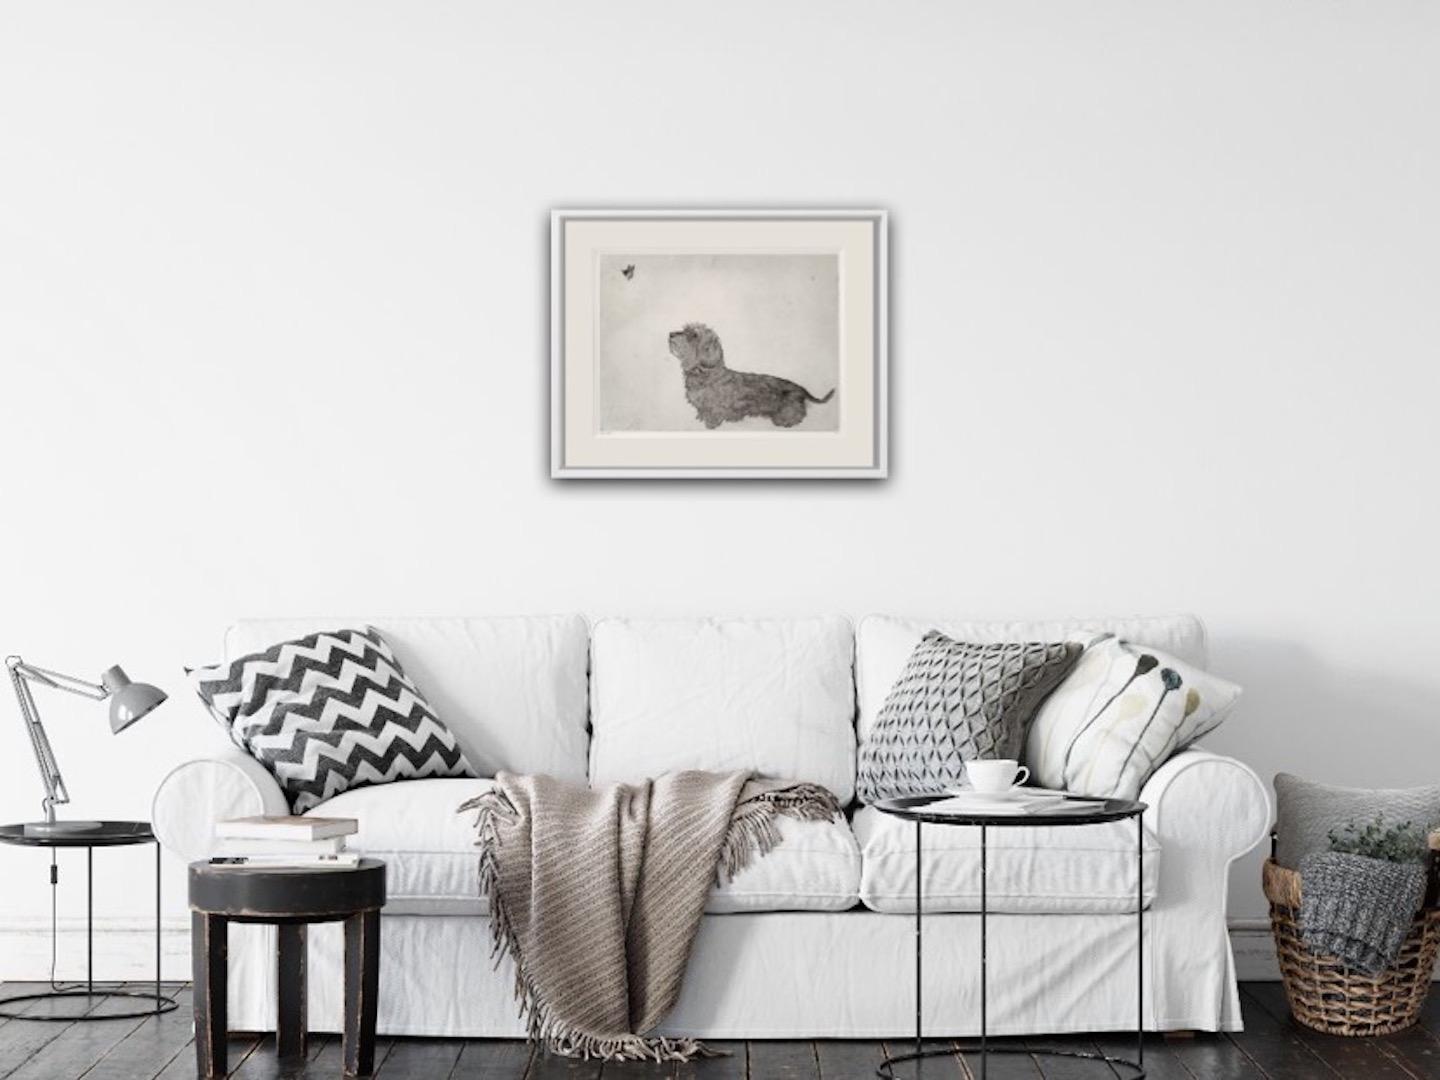 Guy Allen
Dachshund and Butterfly
Etching
Edition Size: 75
Year Completed: 2015
Image Size: H 40m x W 54 cm
Approximate Size When Framed: H 69cm x W 87cm
Sold Unframed
(Please note that in situ images are purely an indication of how a piece may